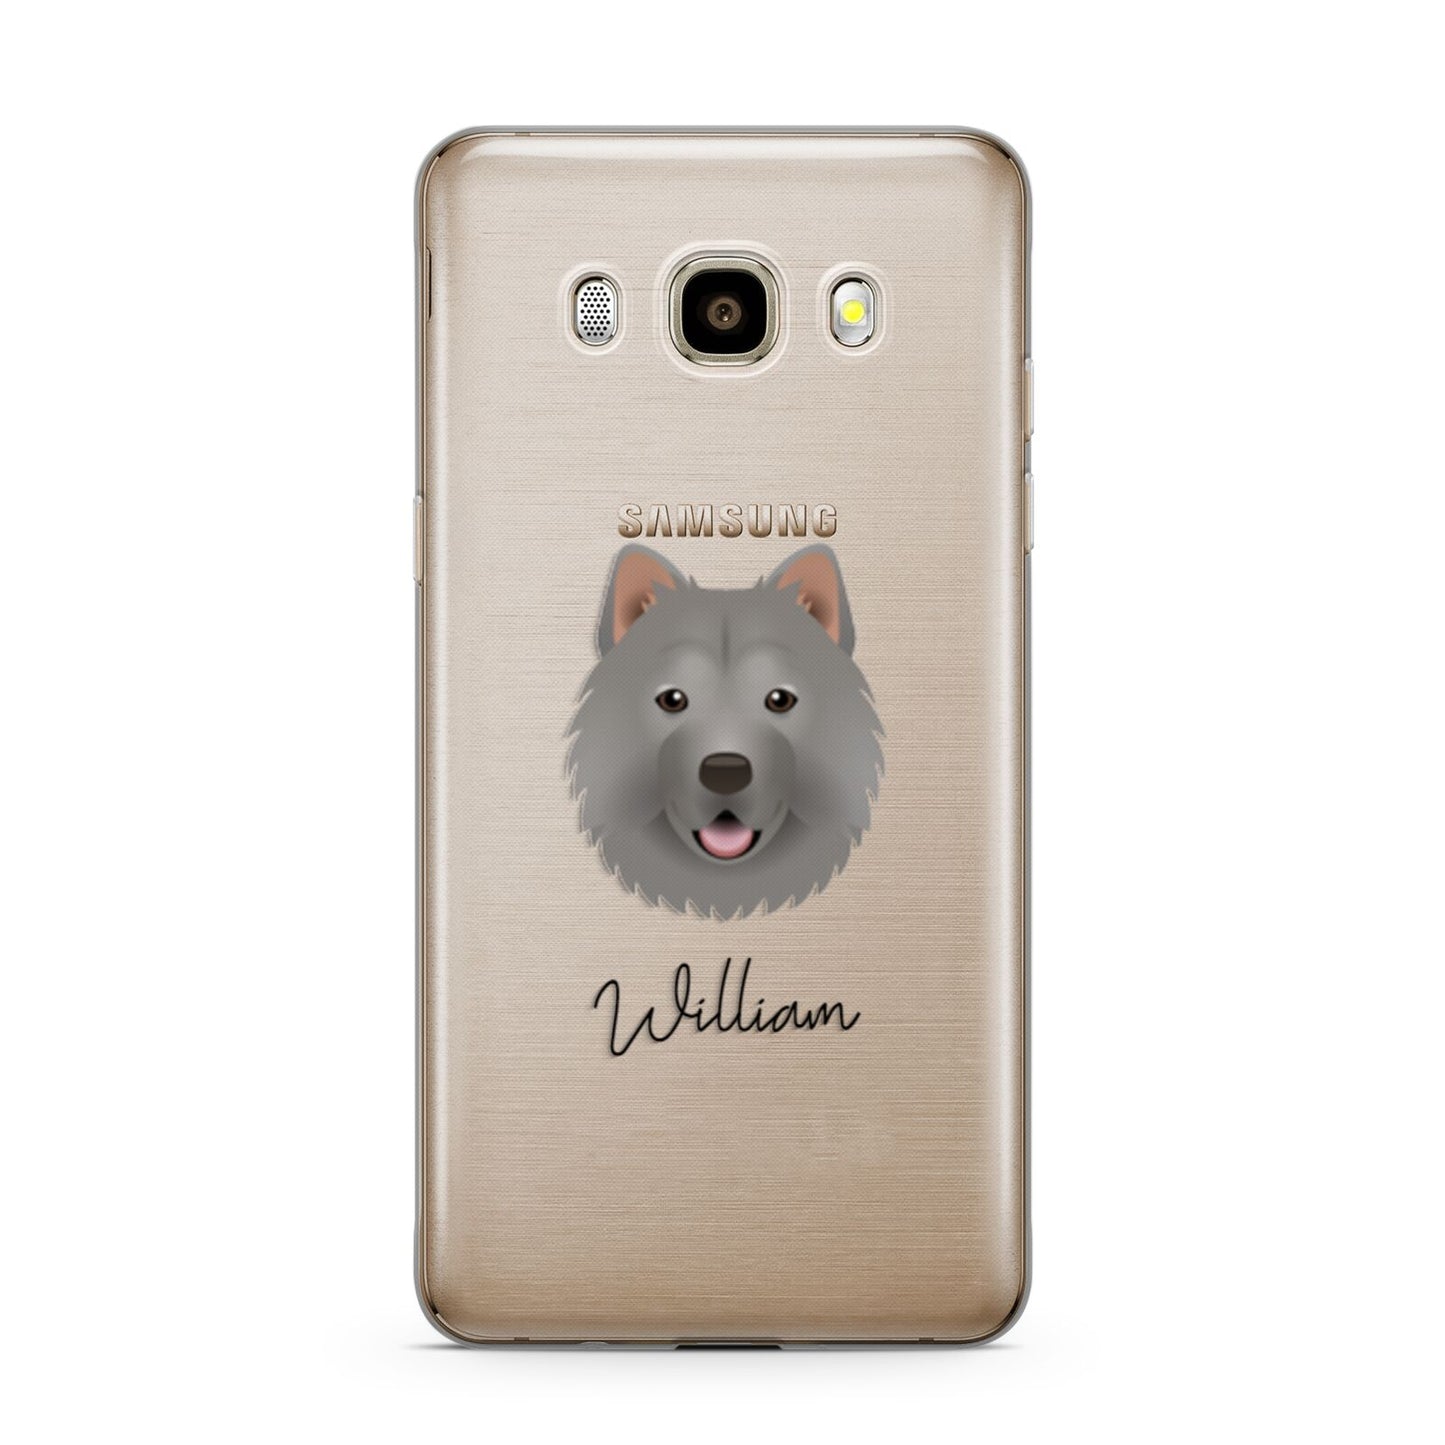 Chusky Personalised Samsung Galaxy J7 2016 Case on gold phone